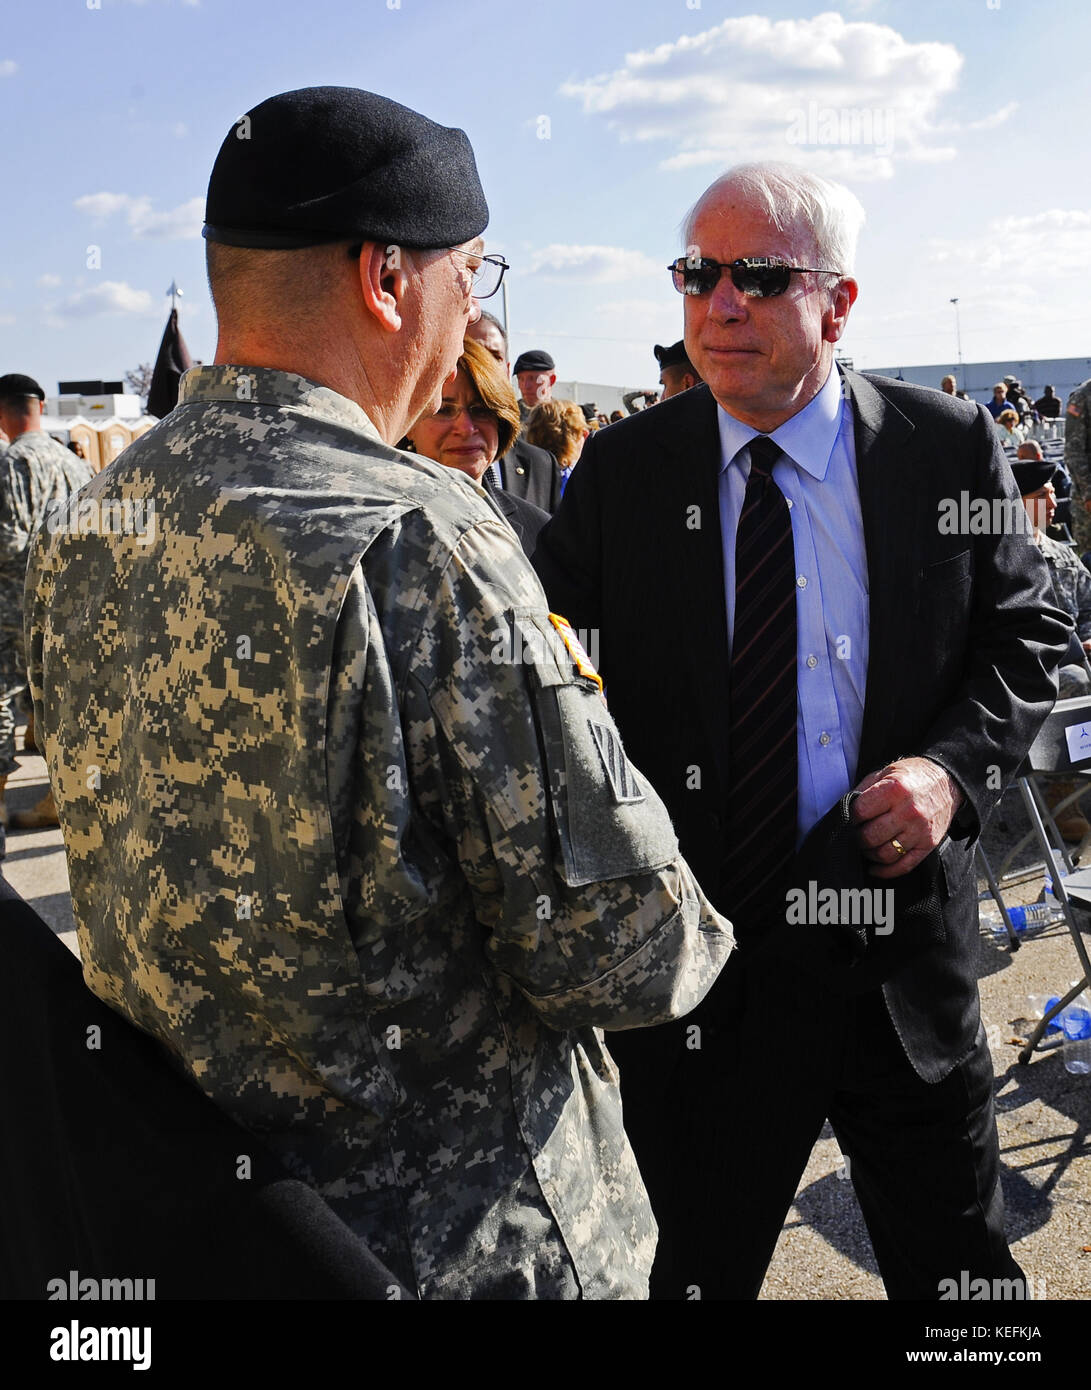 Fort Hood, TX - November 10, 2009 -- U.S. Senator John McCain (Republican of Arizona) (R) greets a soldier as he departs the memorial service for the 12 soldiers and one civilian killed at Fort Hood U.S Army Post near Killeen, Texas, USA 10 November 2009. Army Major Malik Nadal Hasan reportedly shot and killed 13 people, 12 soldiers and one civilian, and wounded 30 others in a rampage 05 November at the base's Soldier Readiness Center where deploying and returning soldiers undergo medical screenings.  .Credit: Tannen Maury / Pool via CNP /MediaPunch Stock Photo